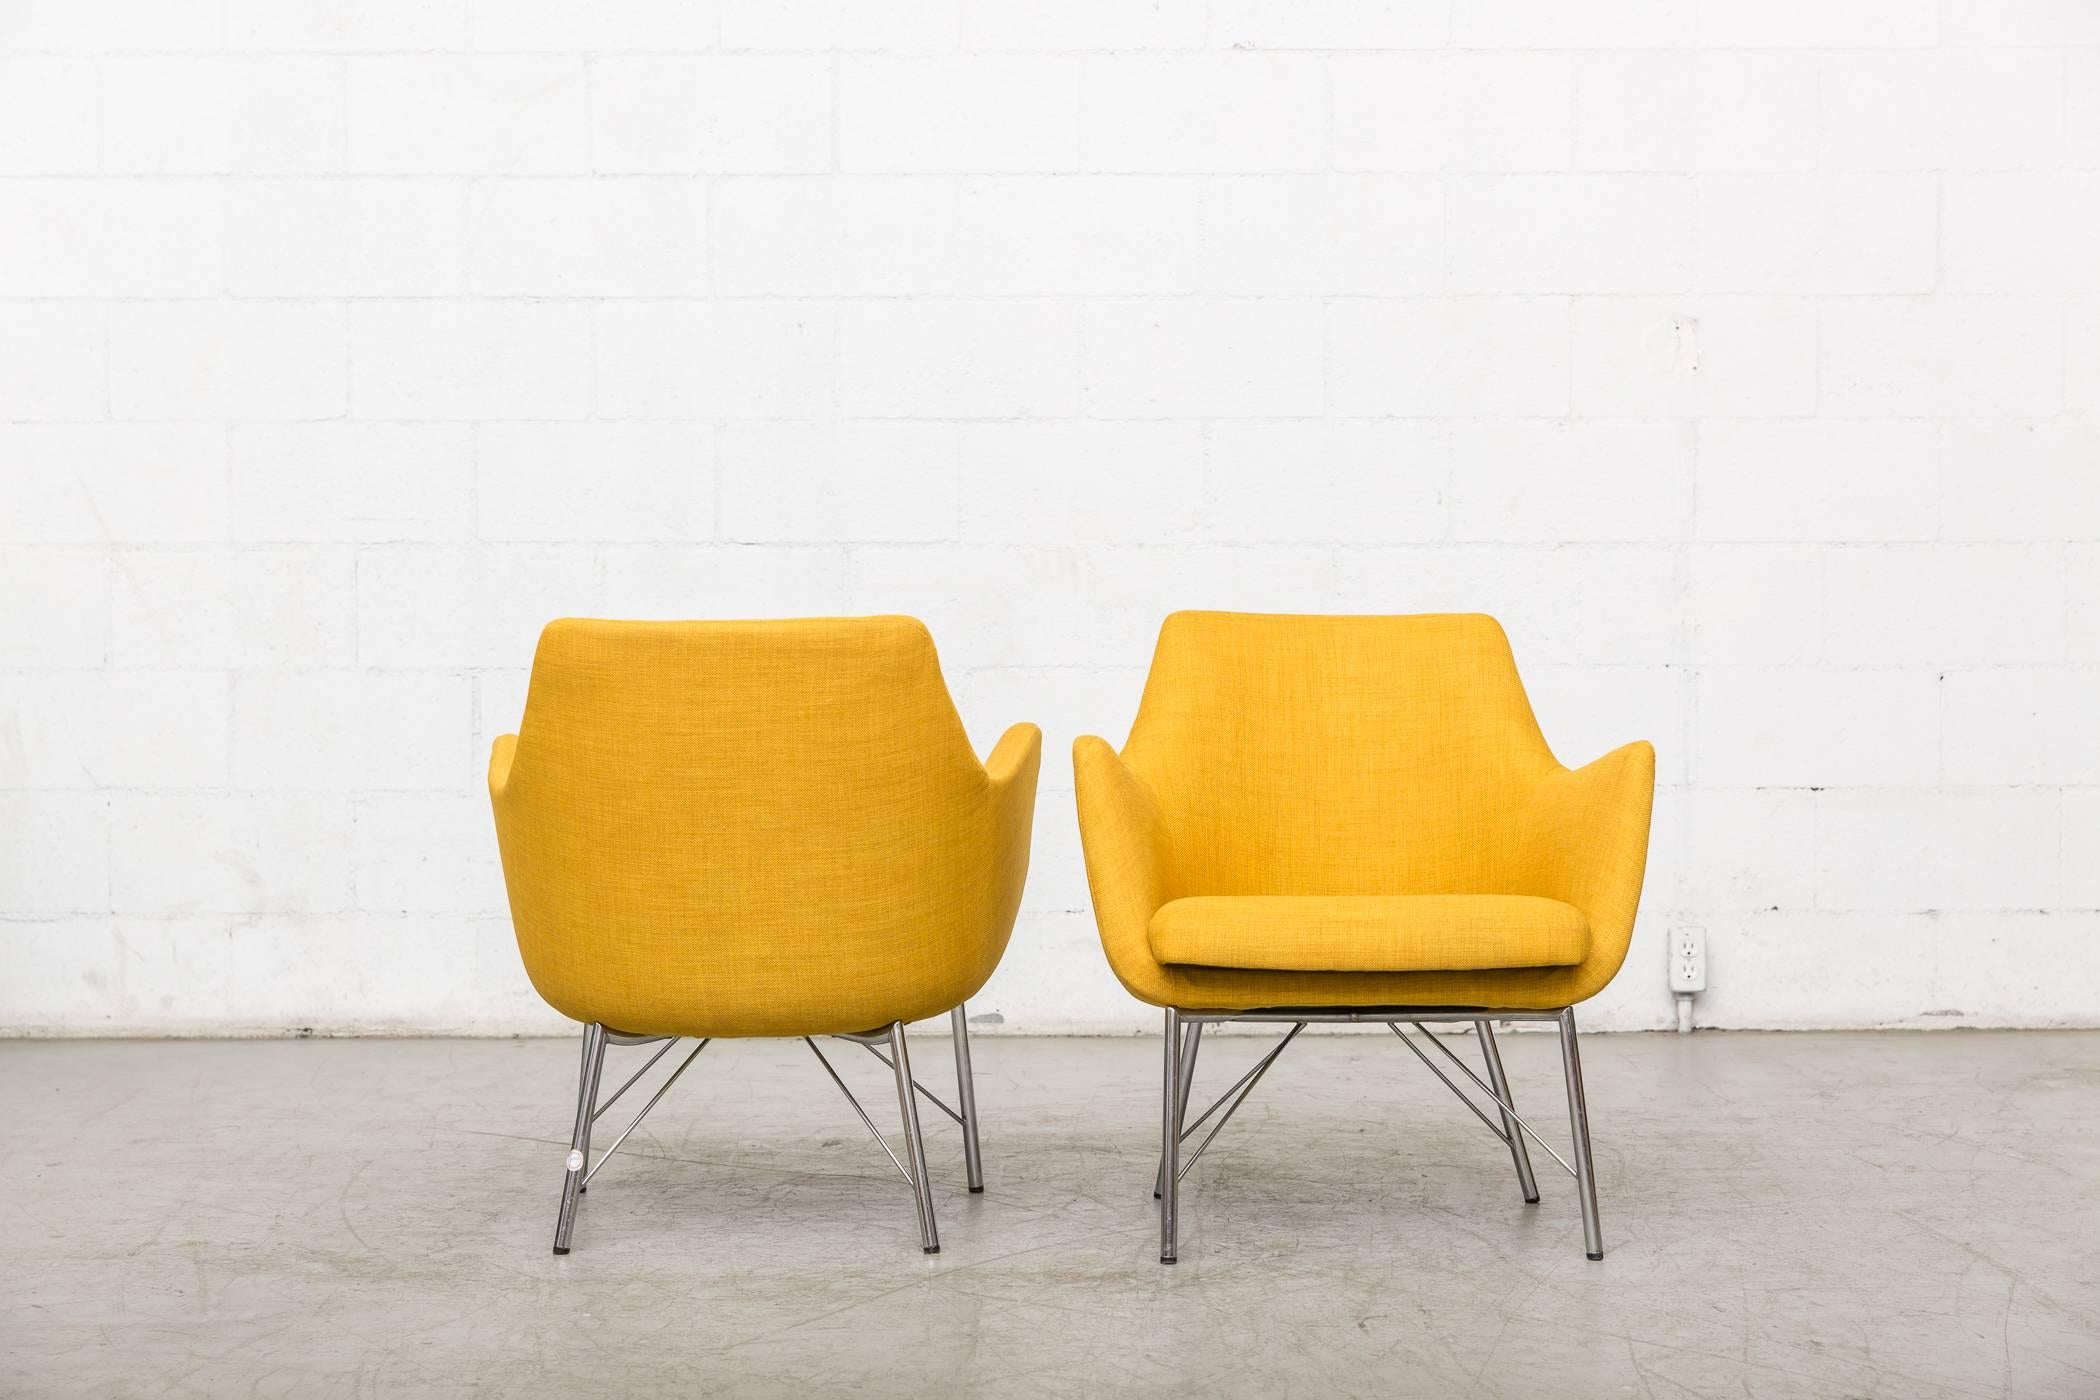 Pair of Ekselius for Pastoe lounge chairs newly re-upholstered in mustard yellow upholstery with original architectural chrome base. Frames are original with some signs of wear consistent with age and use. Set price.